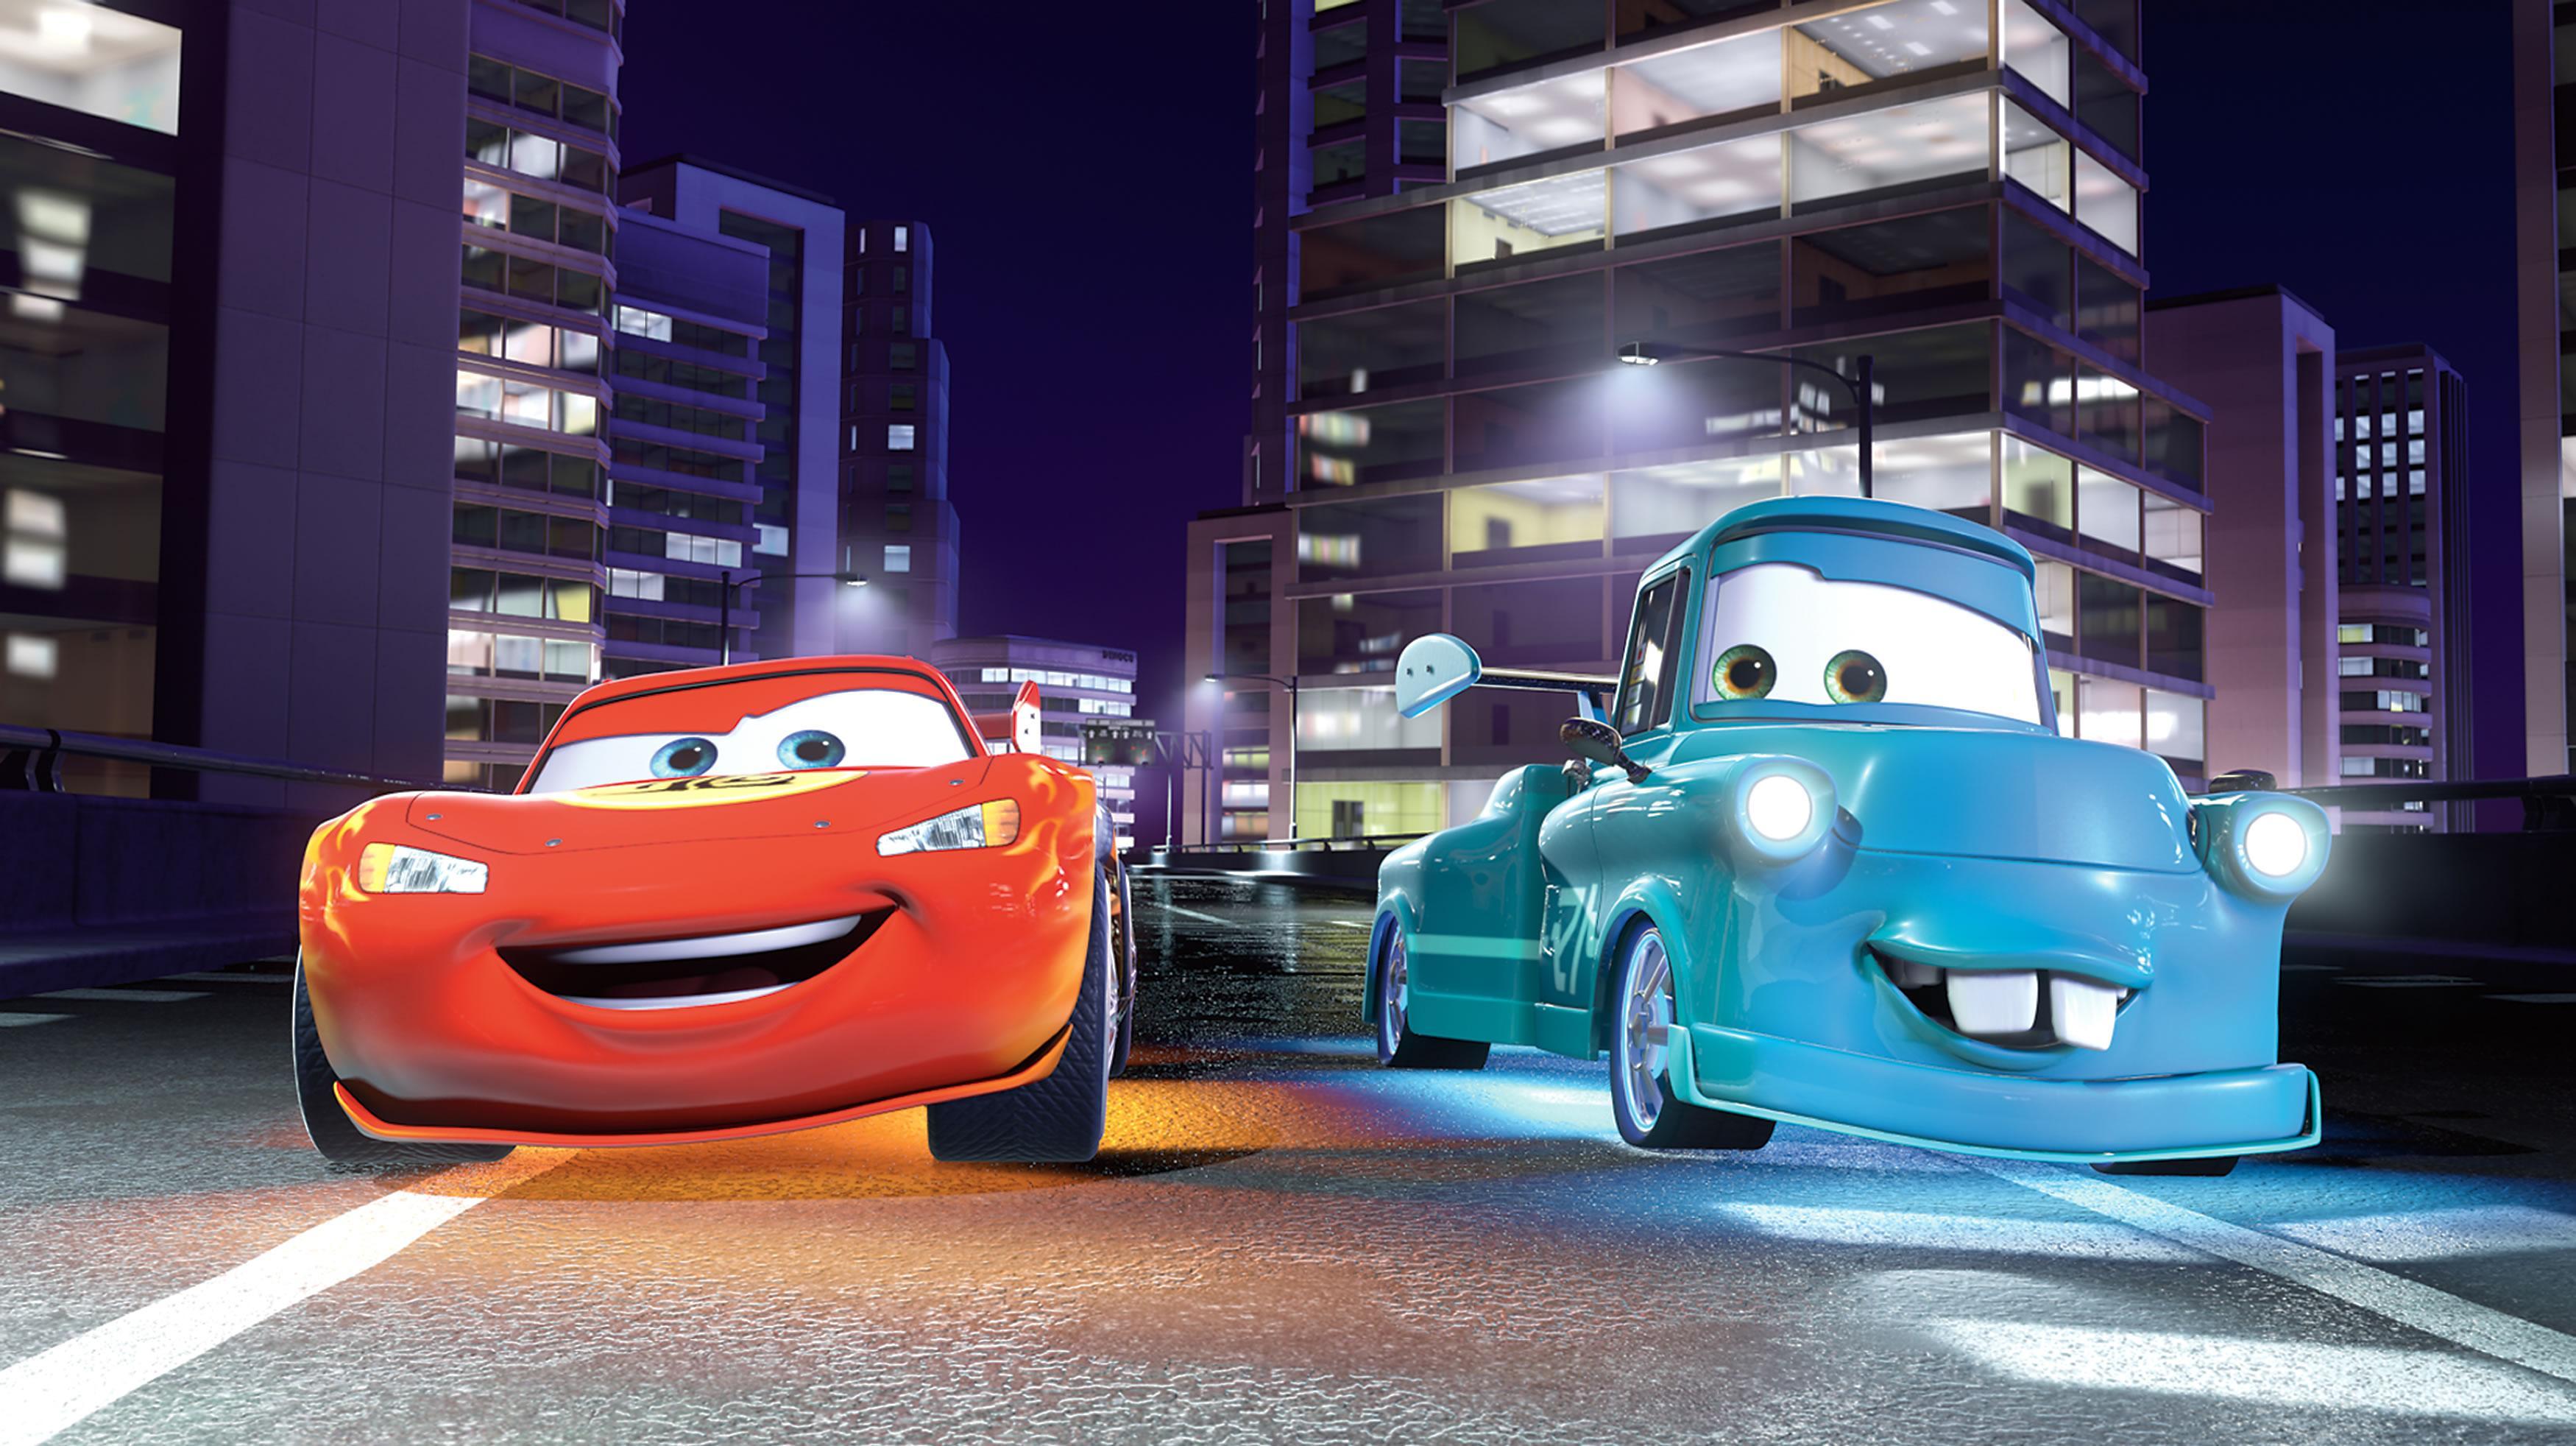 Cars 2 GamesTV for Android - APK Download